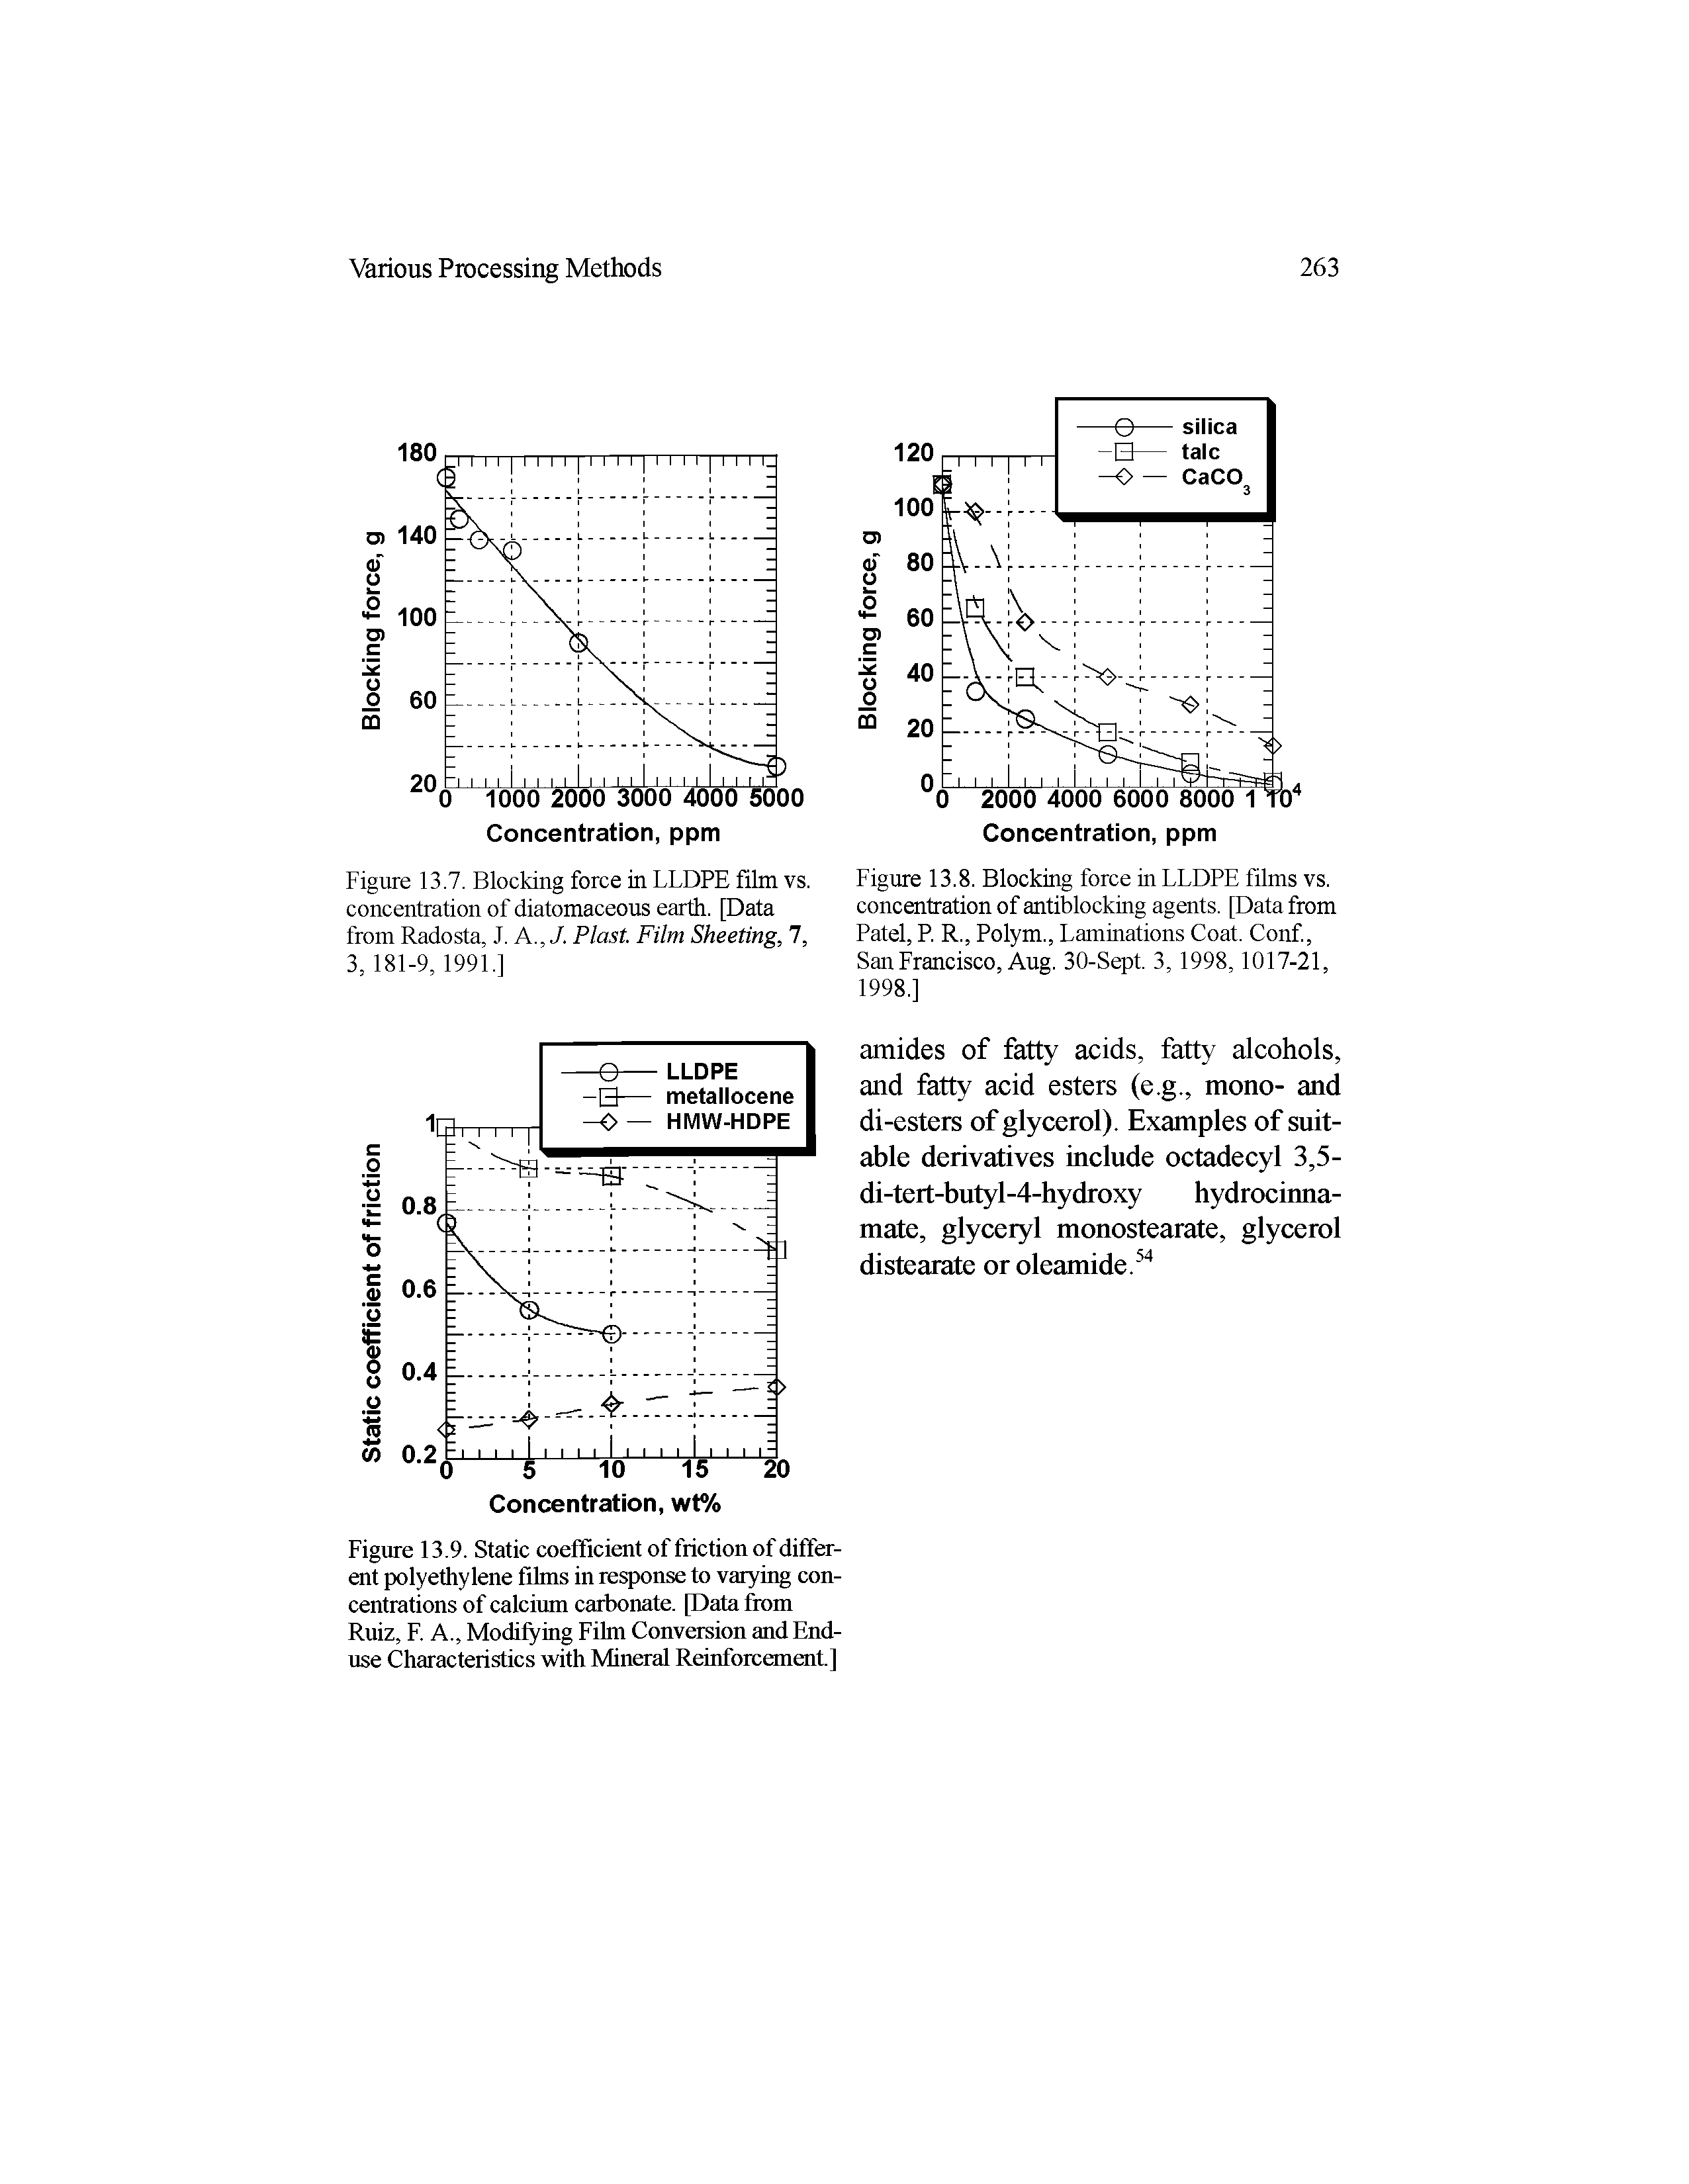 Figure 13.8. Blocking force in LLDPE films vs. concentration of antiblocking agents. [Data from Patel, P. R., Polym., Laminations Coat. Conf, San Francisco, Aug. 30-Sept. 3,1998,1017-21, 1998.]...